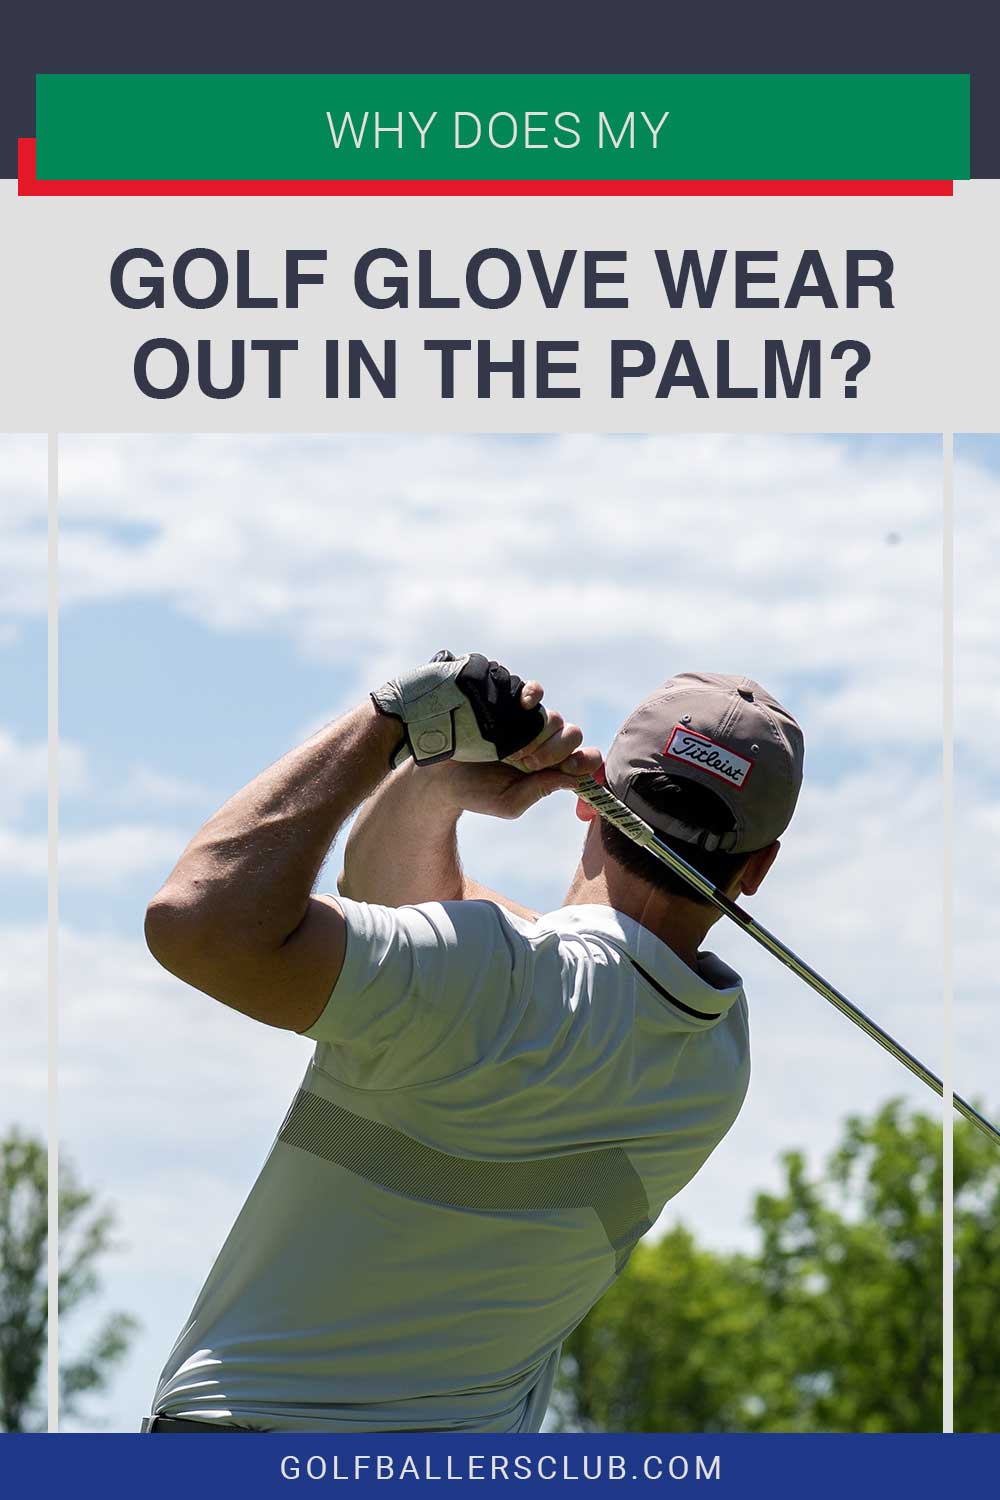 Man took a shot with a golf club - Why Does My Golf Glove Wear Out In The Palm?